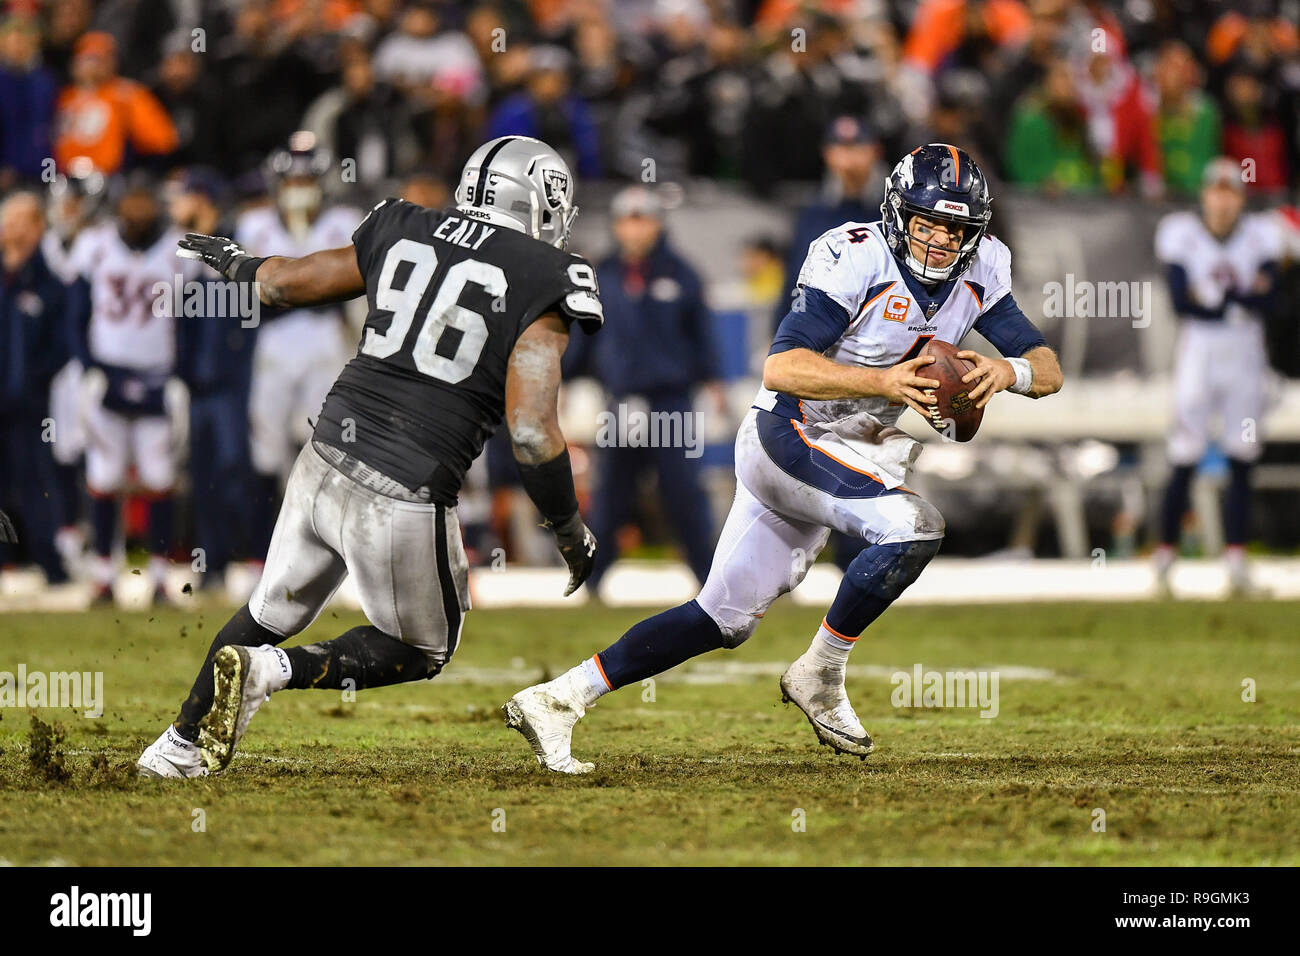 Oakland, CA. 24th Dec, 2018. Oakland Raiders defensive end Kony Ealy (96) chases Denver Broncos quarterback Case Keenum (4) during the NFL football game between the Denver Broncos and the Oakland Raiders at the Oakland Alameda Coliseum in Oakland, CA. Chris Brown/CSM/Alamy Live News Stock Photo